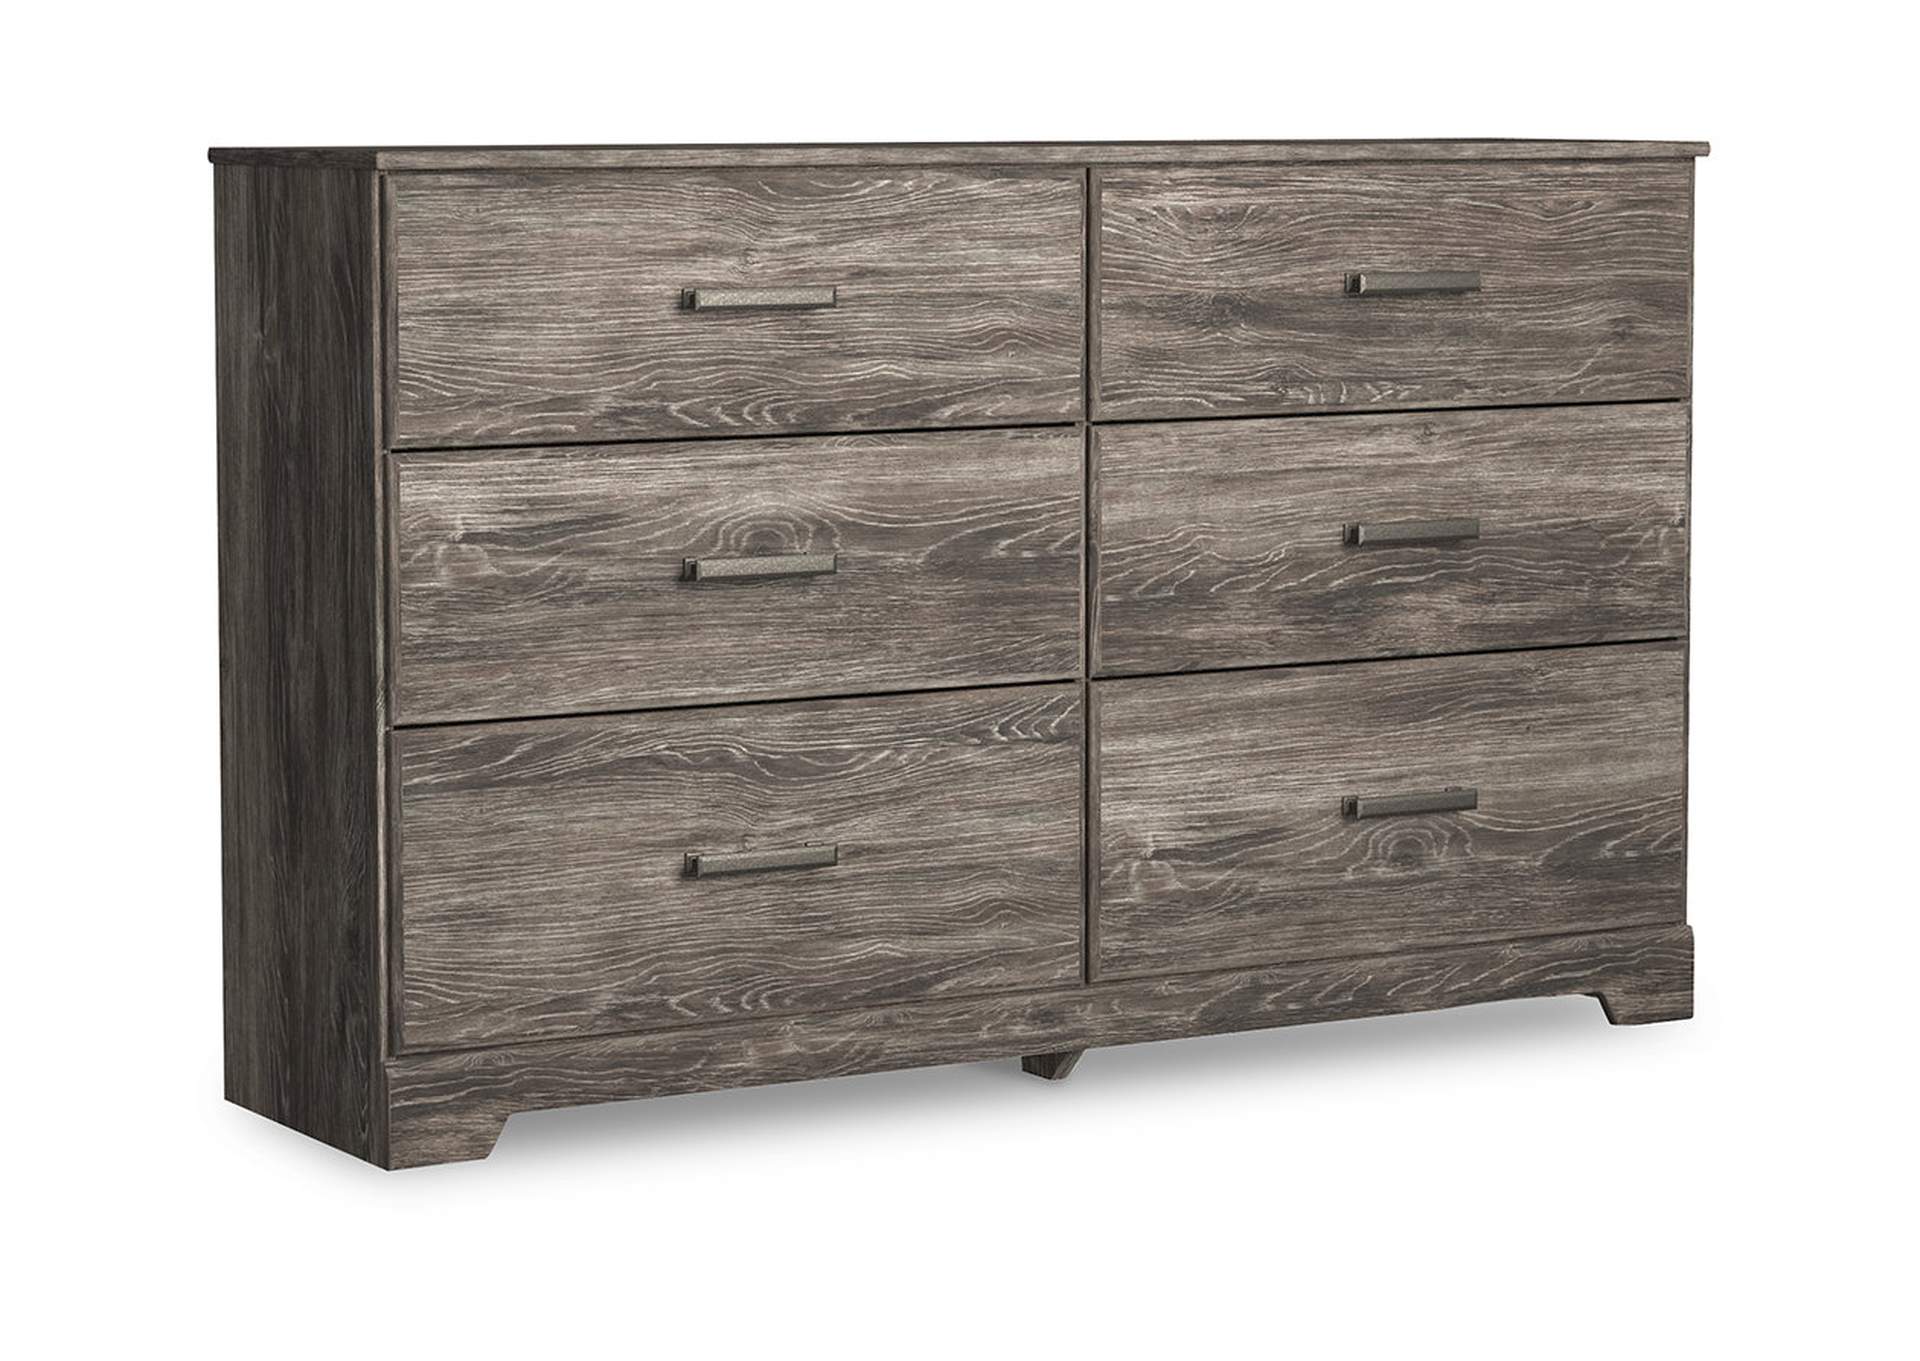 Ralinksi Full Panel Bed, Dresser, Mirror and Nightstand,Signature Design By Ashley